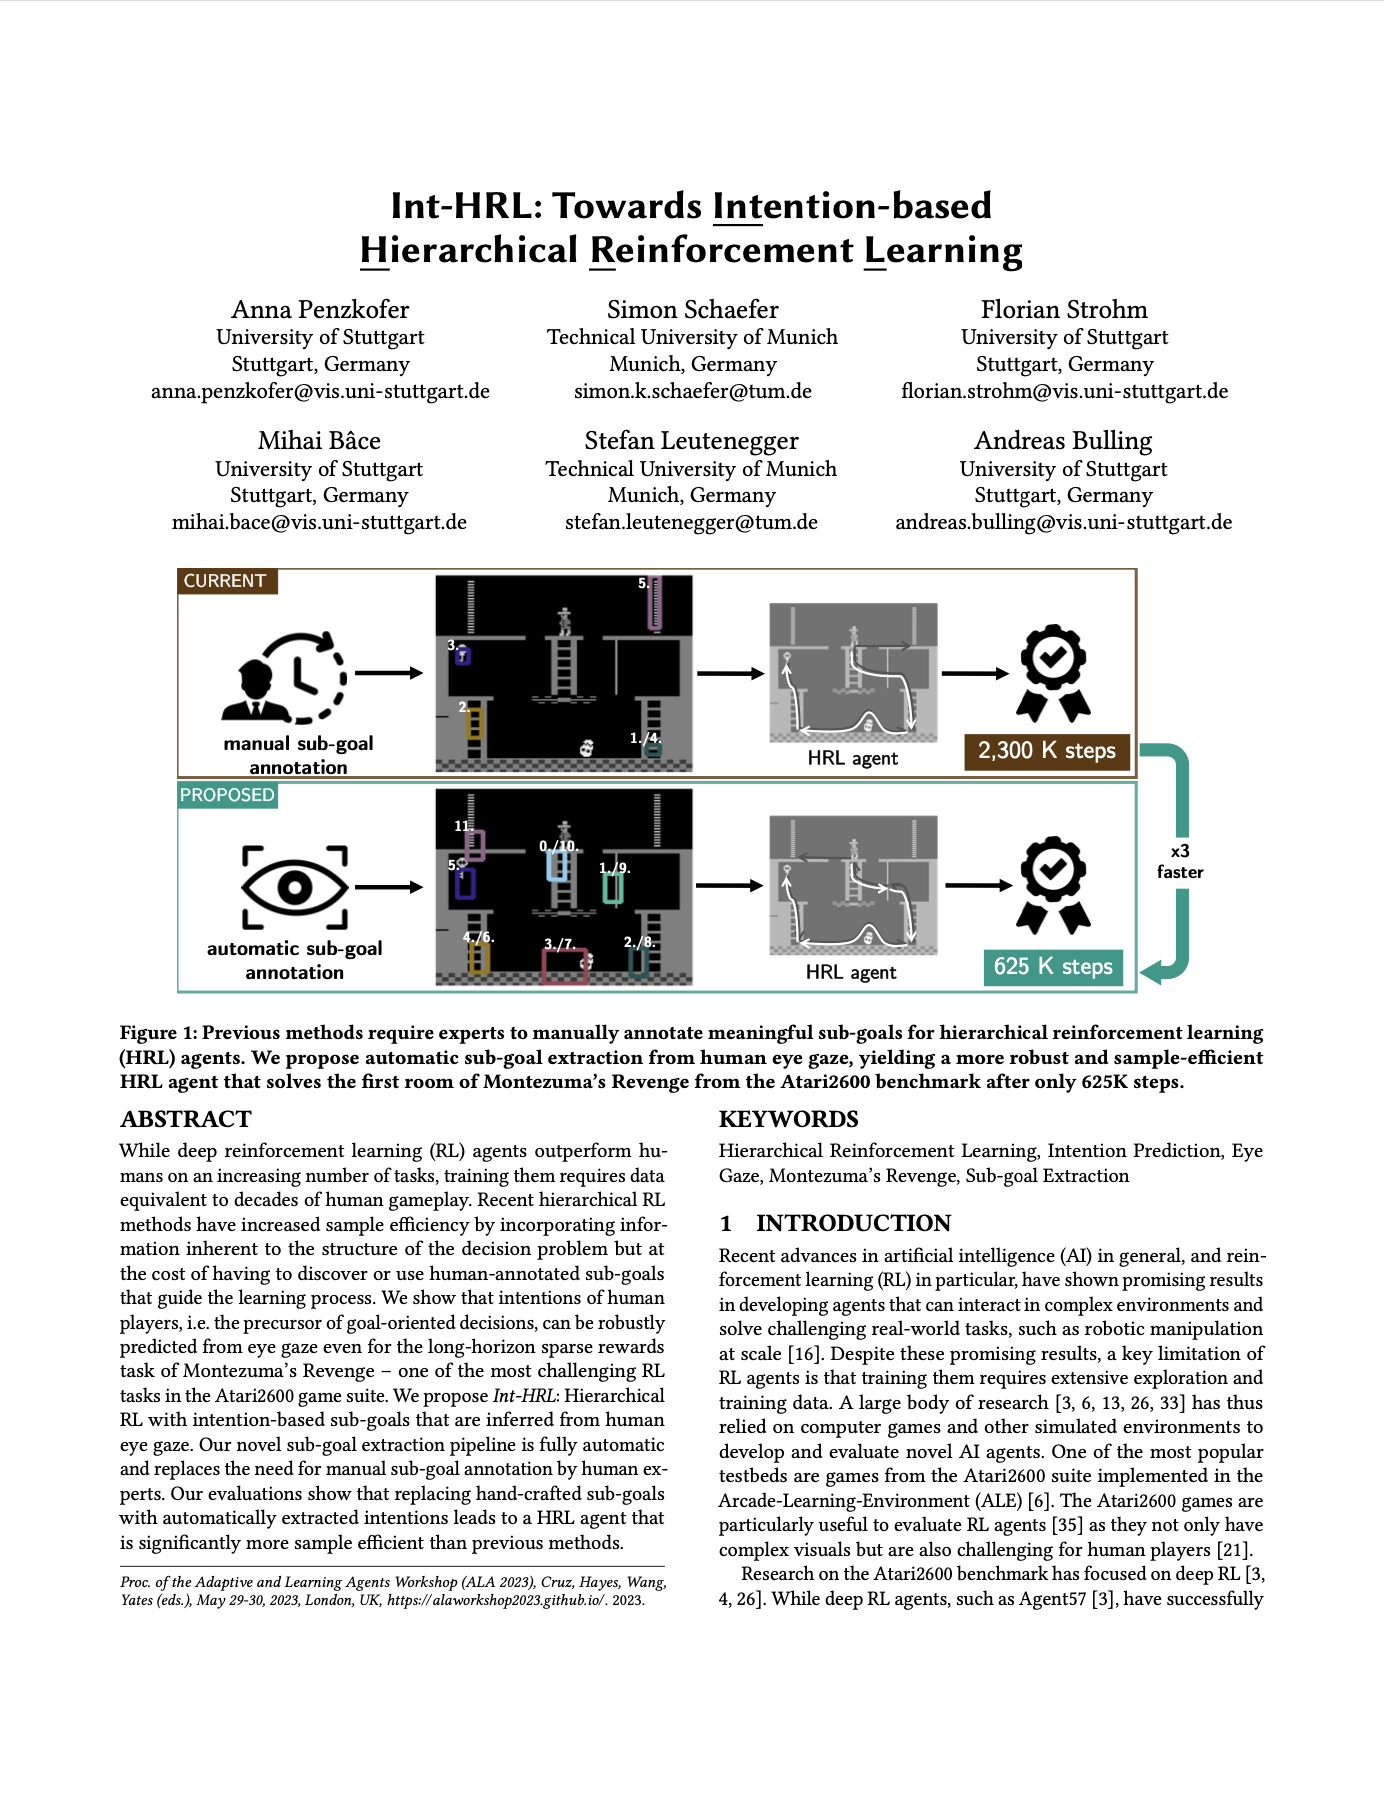 Int-HRL: Towards Intention-based Hierarchical Reinforcement Learning